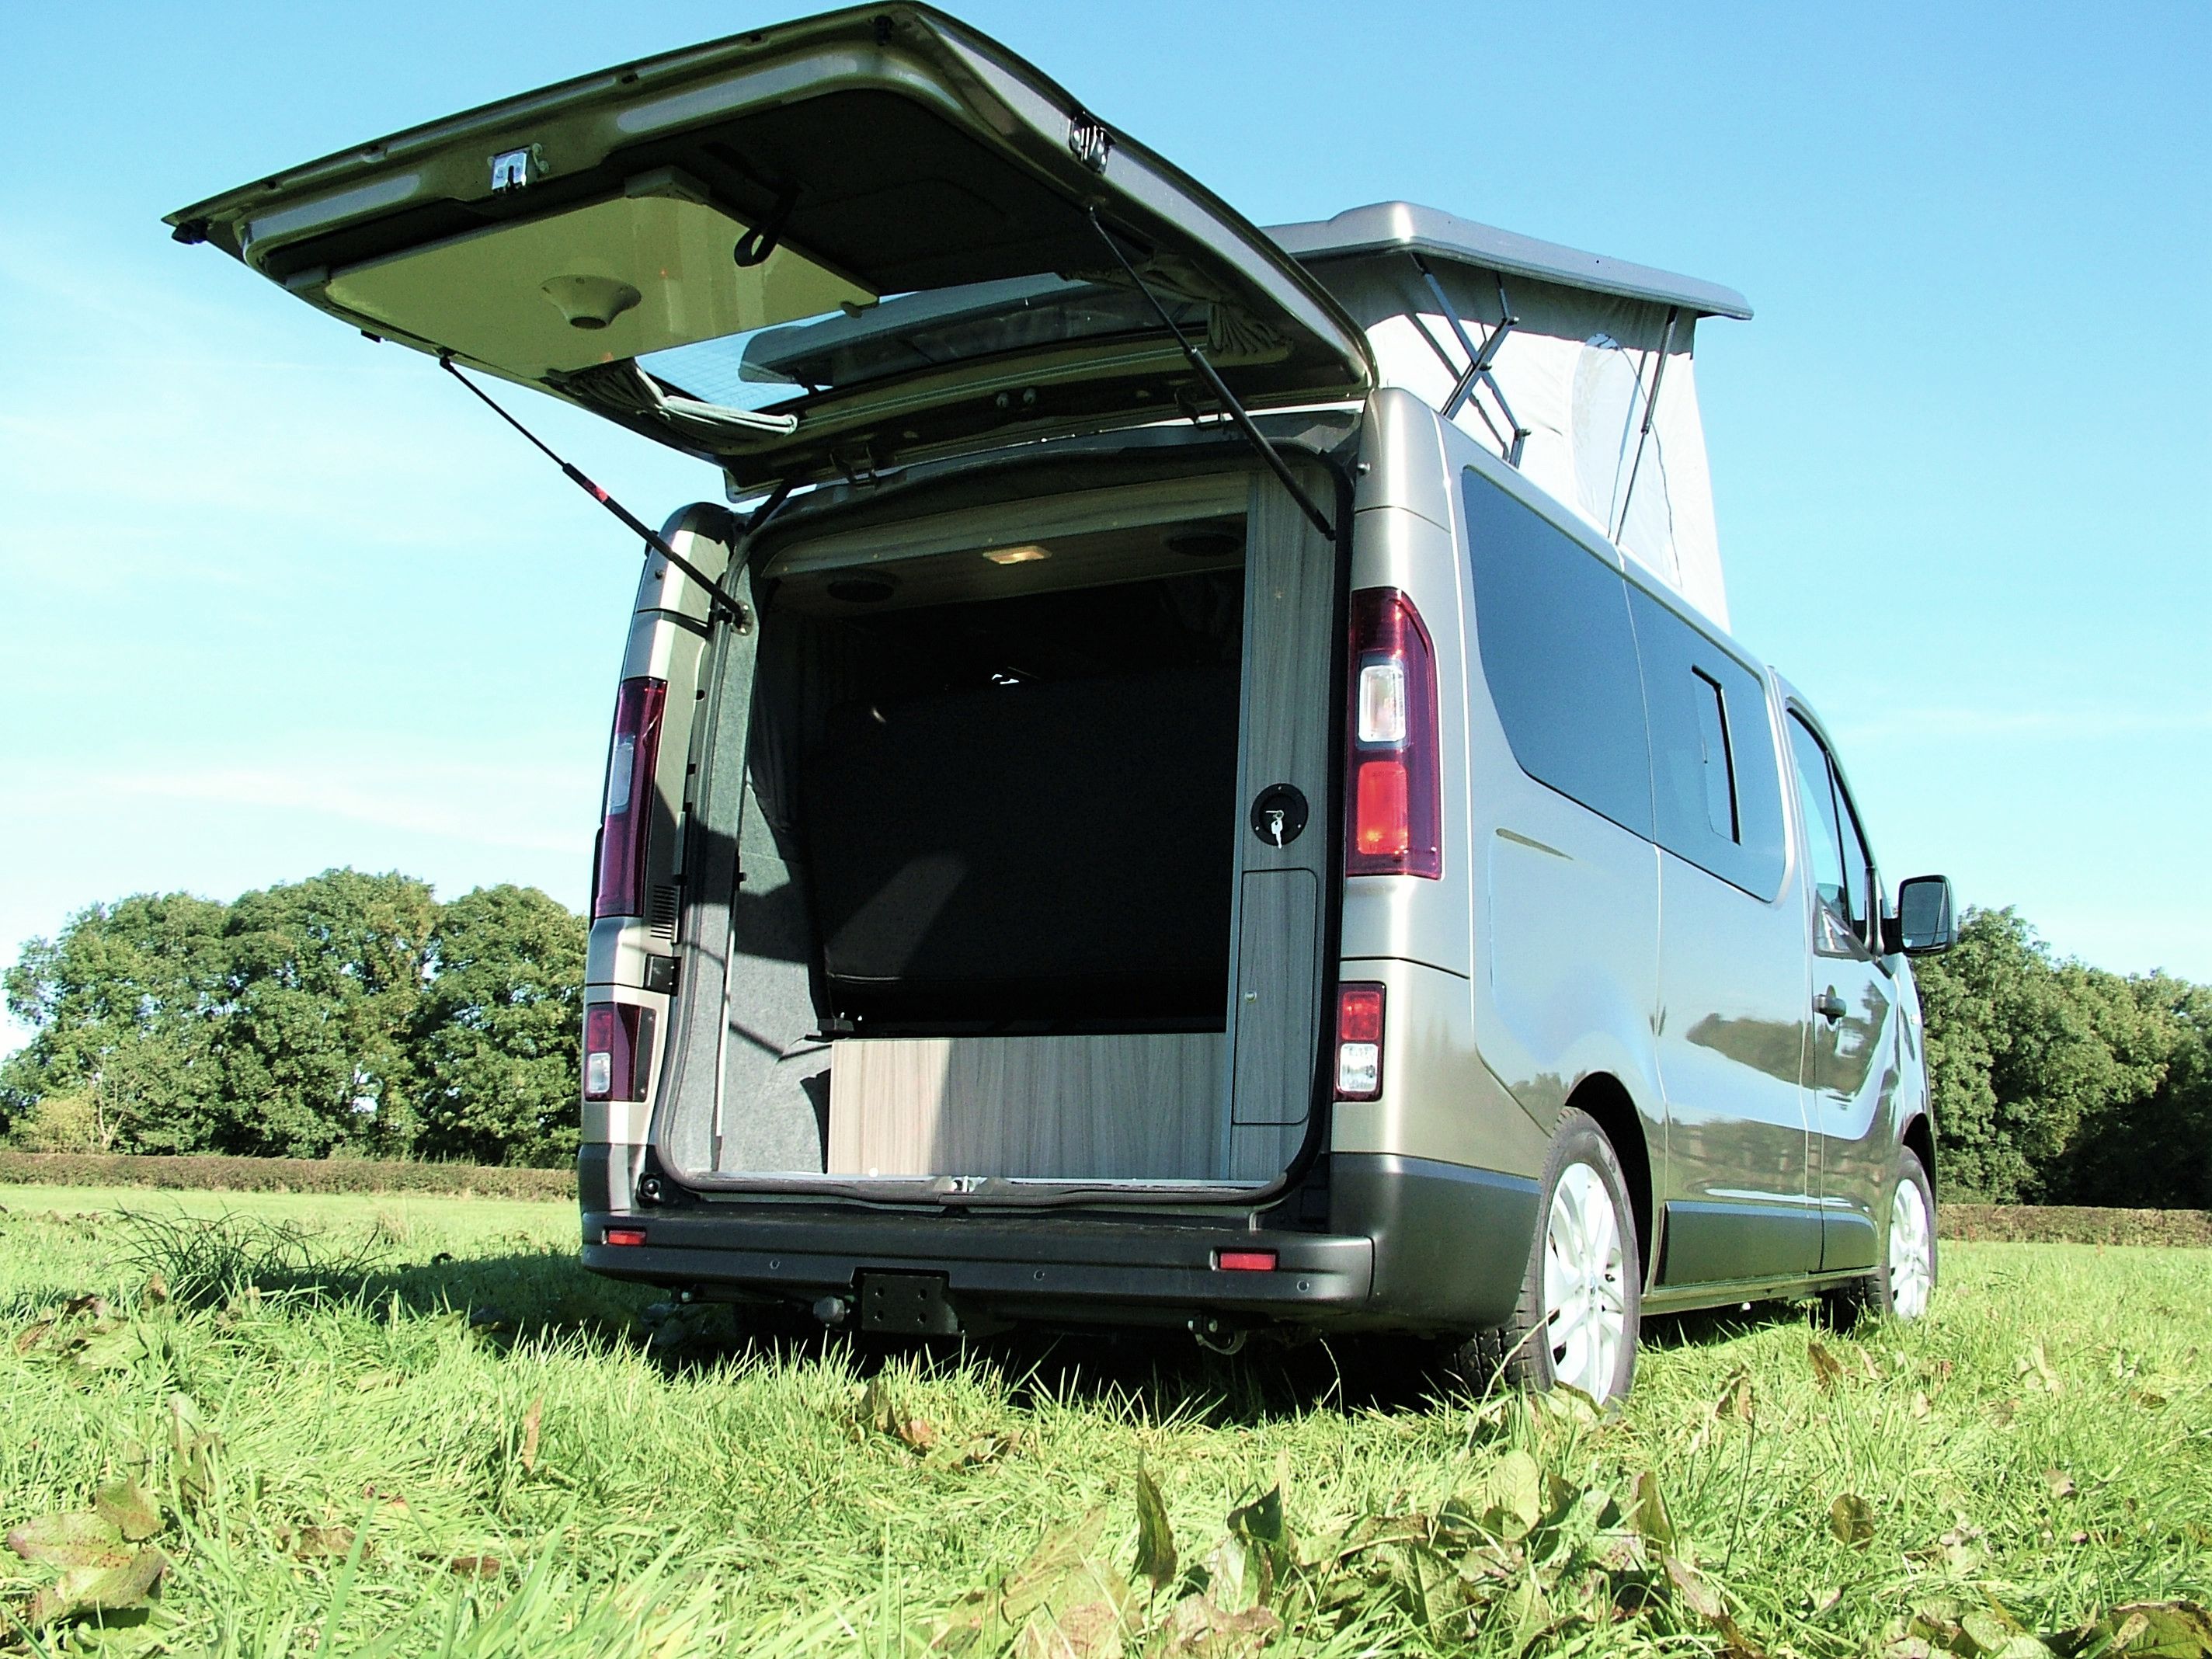 Renault Trafic Camper Conversion Including Drive Away Awning ⋆ Quirky ...